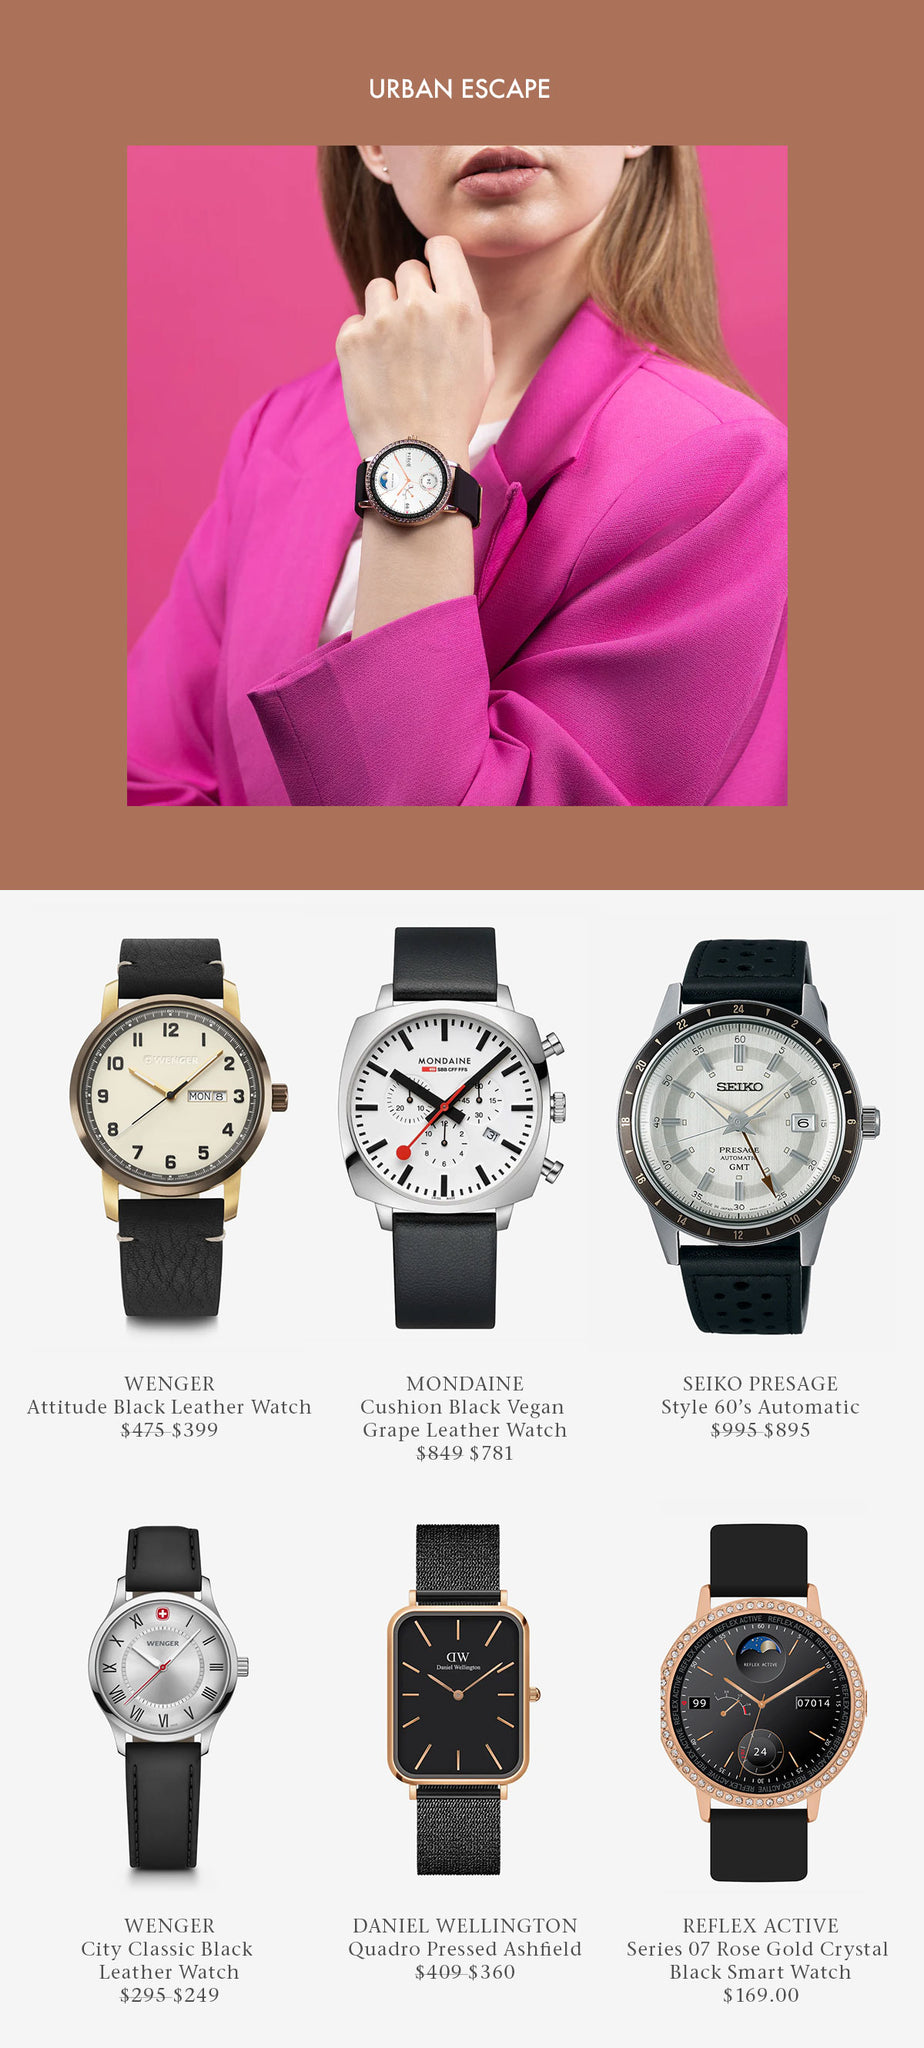 Shop watches perfect for an urban / city weekend escape